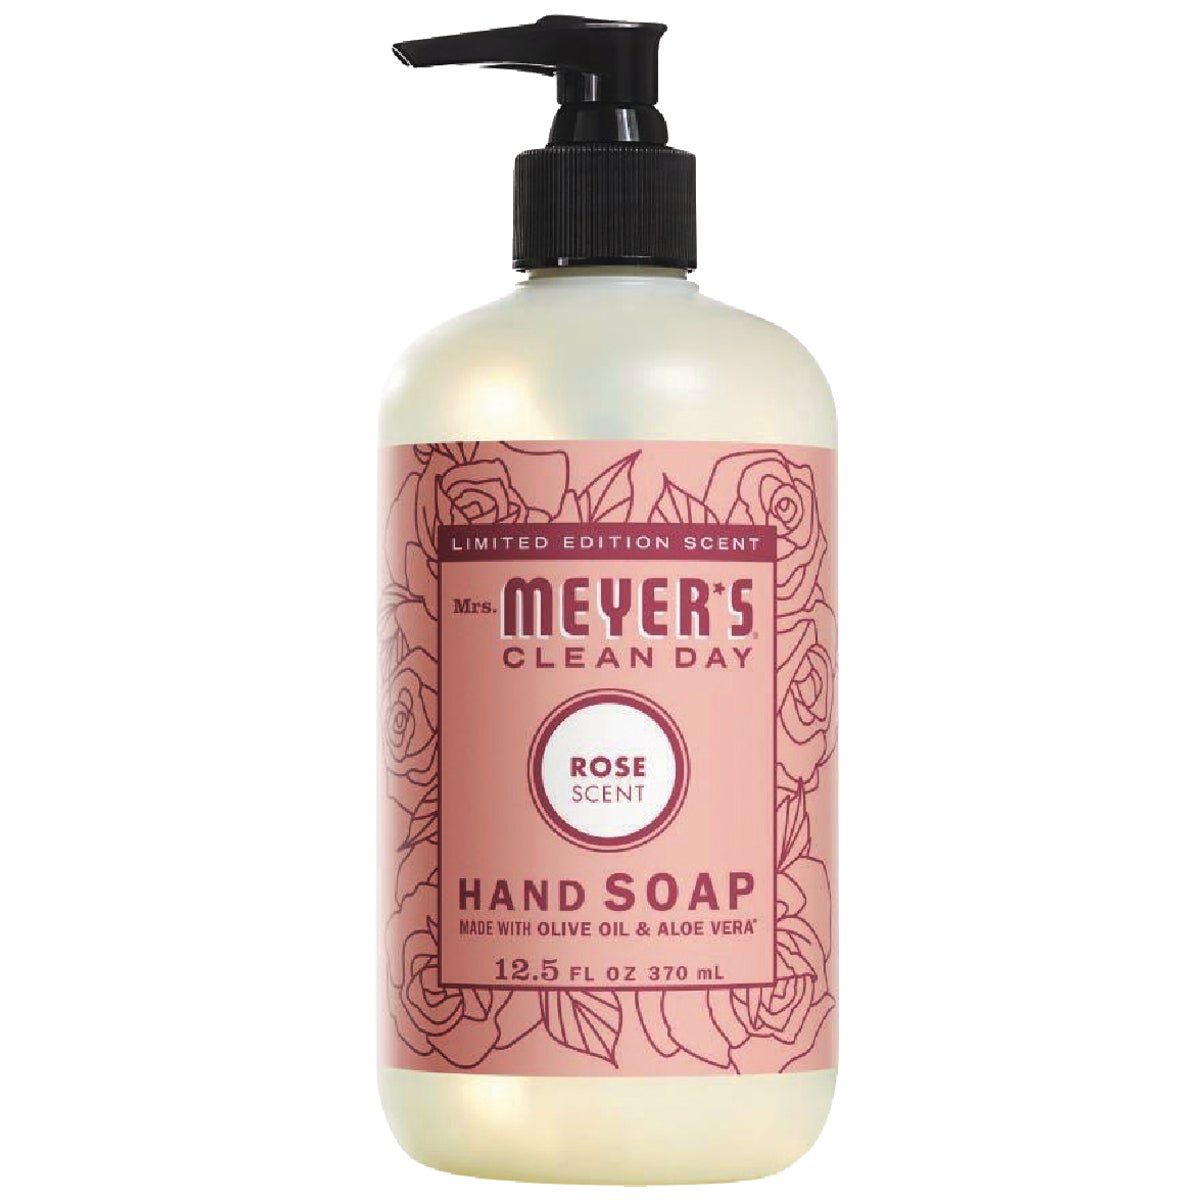 Mrs. Meyer's Clean Day 12.5 Oz. Rose Hand Soap